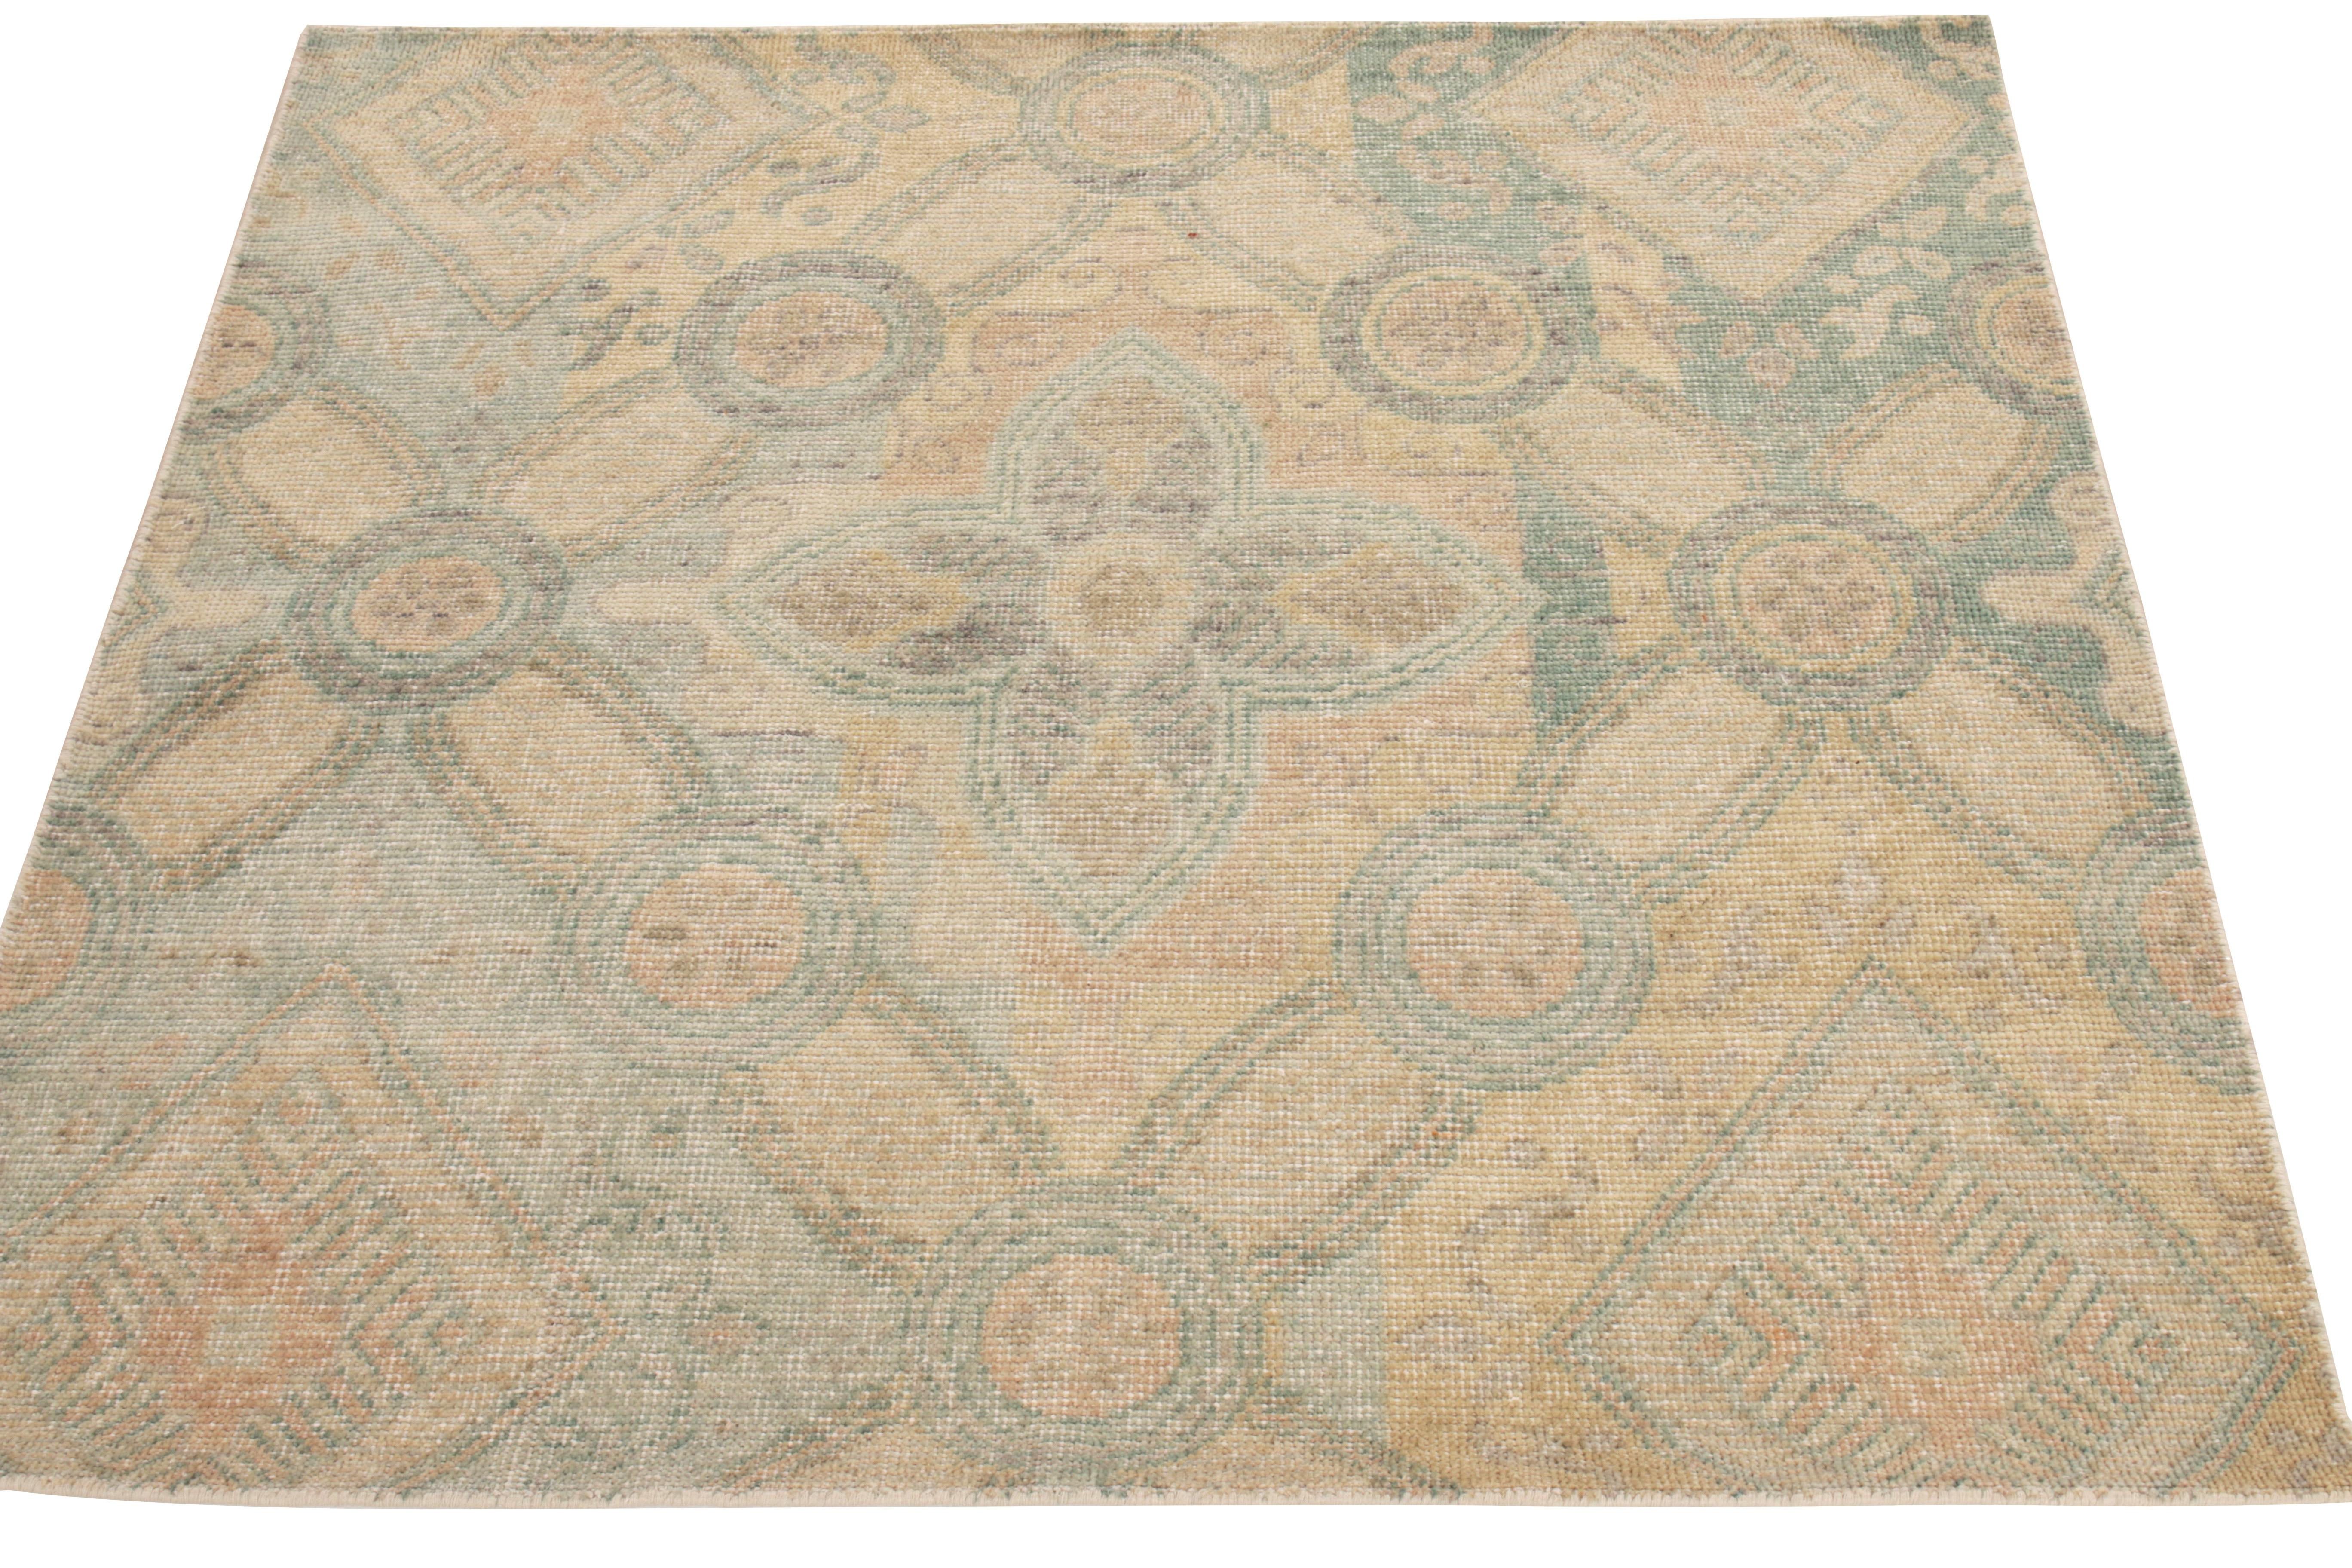 Boasting a delicious blend of floral patterns & Art Deco sensibilities, Rug & Kilim presents this distressed style rug from its Homage collection. hand knotted in wool, the 6x8 scale relishes gigantic florals & diamond designs in azure blue, green,